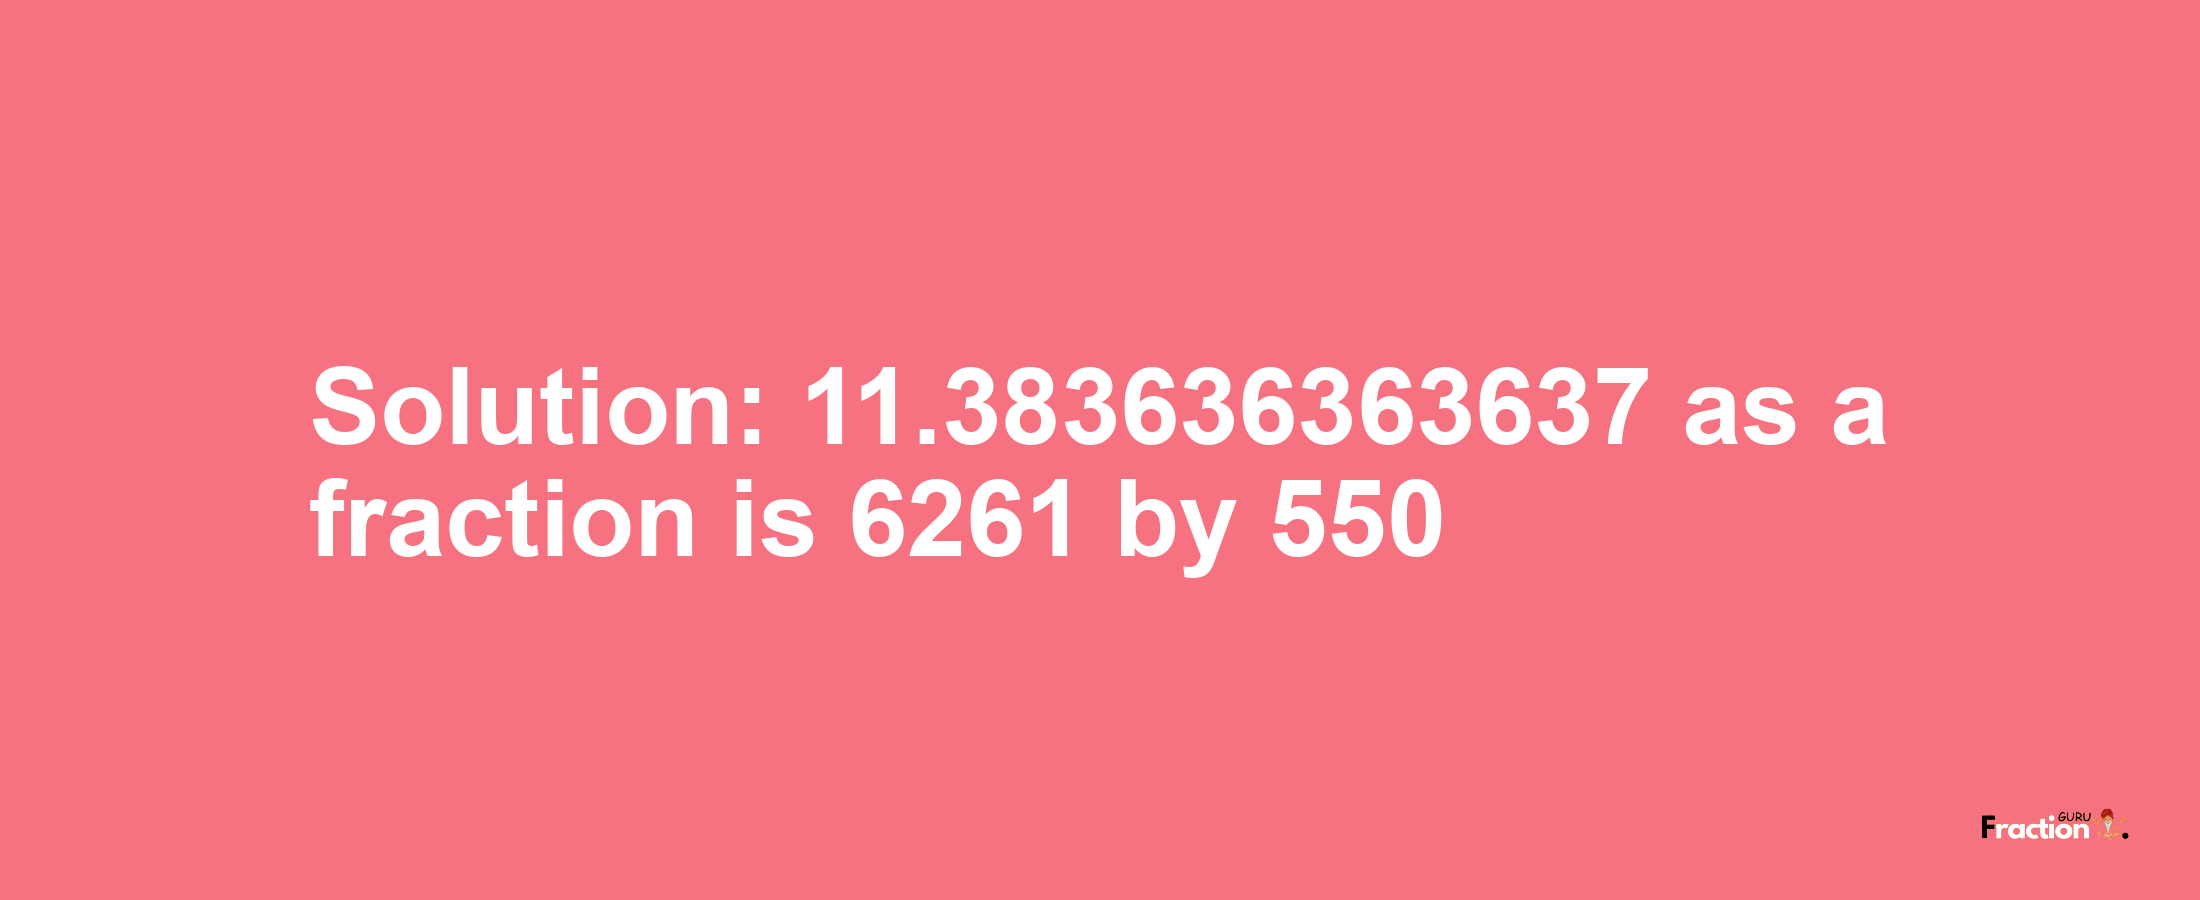 Solution:11.383636363637 as a fraction is 6261/550